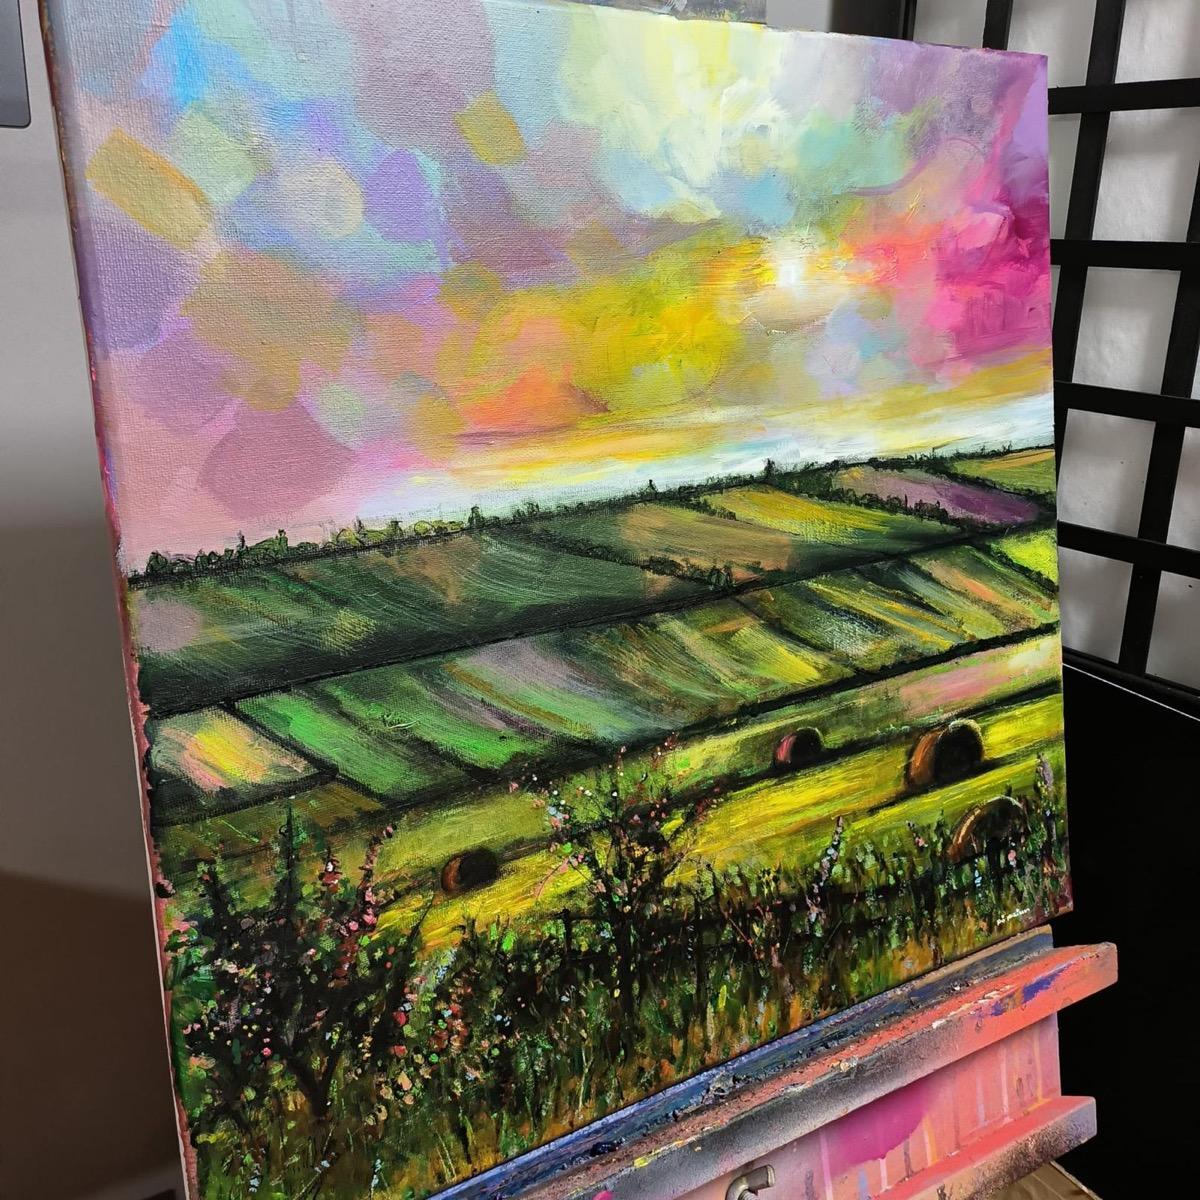 Original painting by Kris McKinnon. A view of hay bales on green hills under a colourful sky showing various pastel tones.

ADDITIONAL INFORMATION:
Original painting
Acrylic on canvas
Sold unframed
Complete size of unframed work: 50 H x 50 W x 2 D